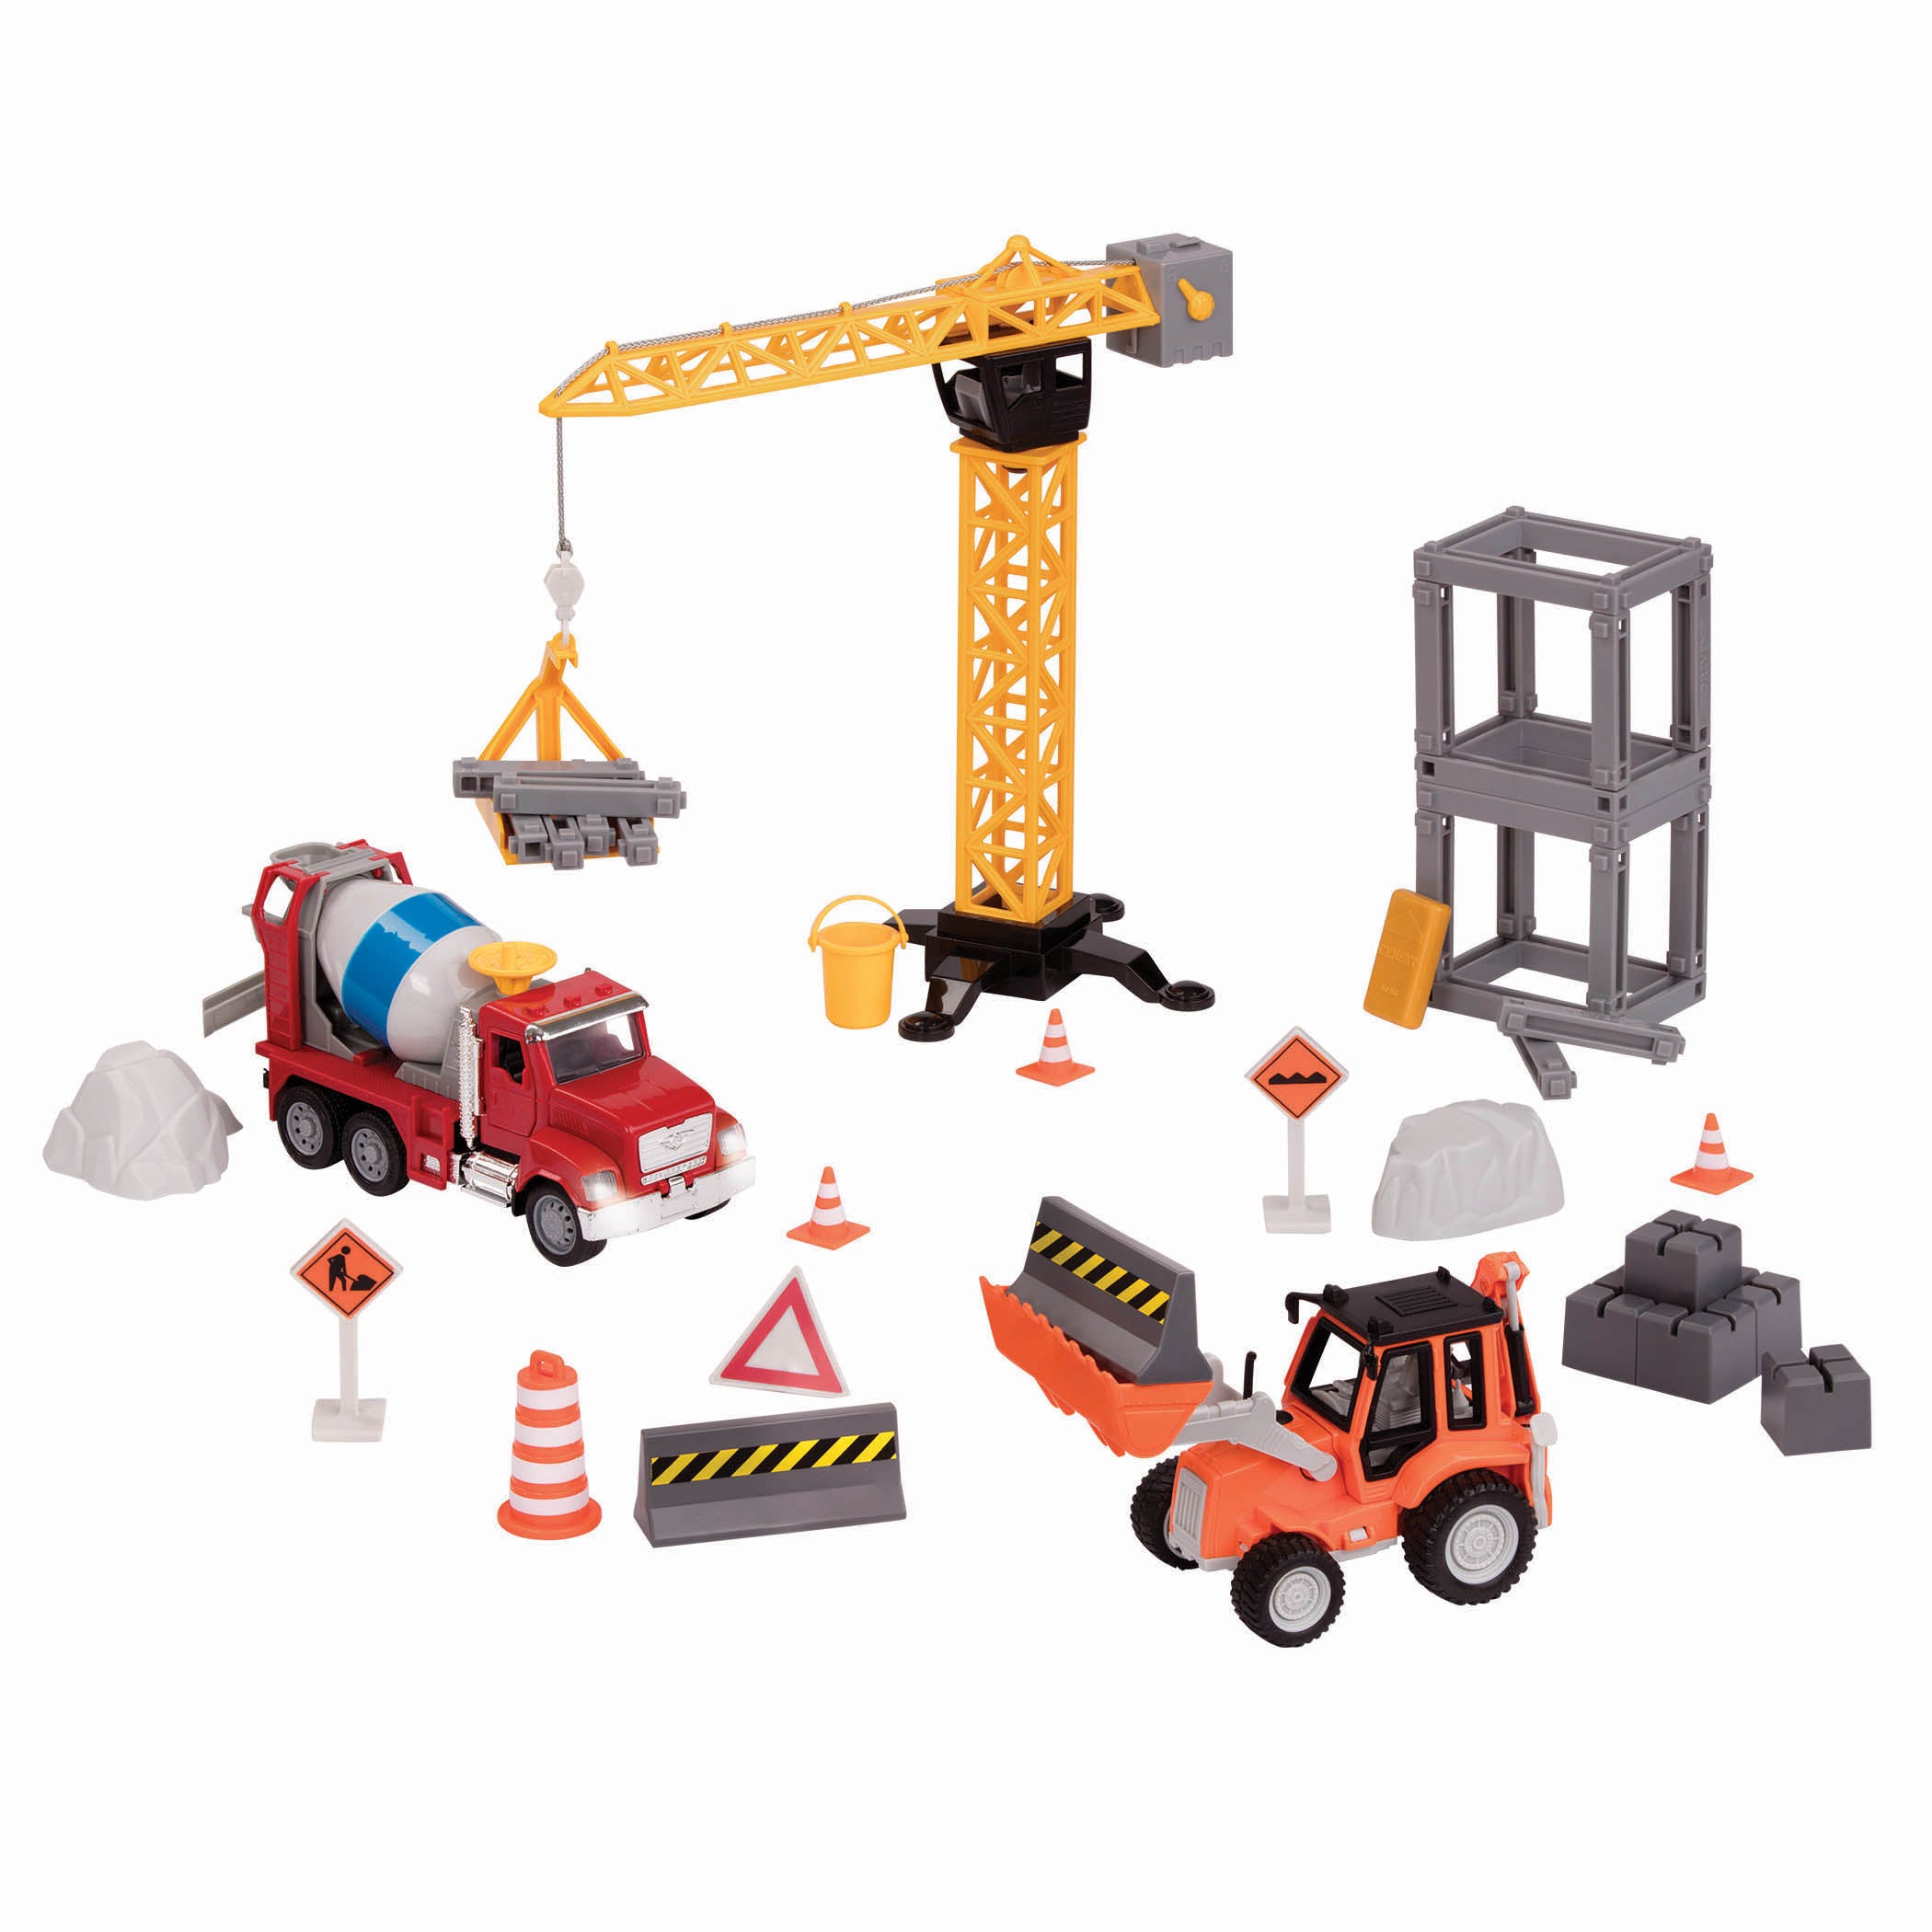 Crane Construction Vehicles for kids with Blippi toy Flatbed Truck